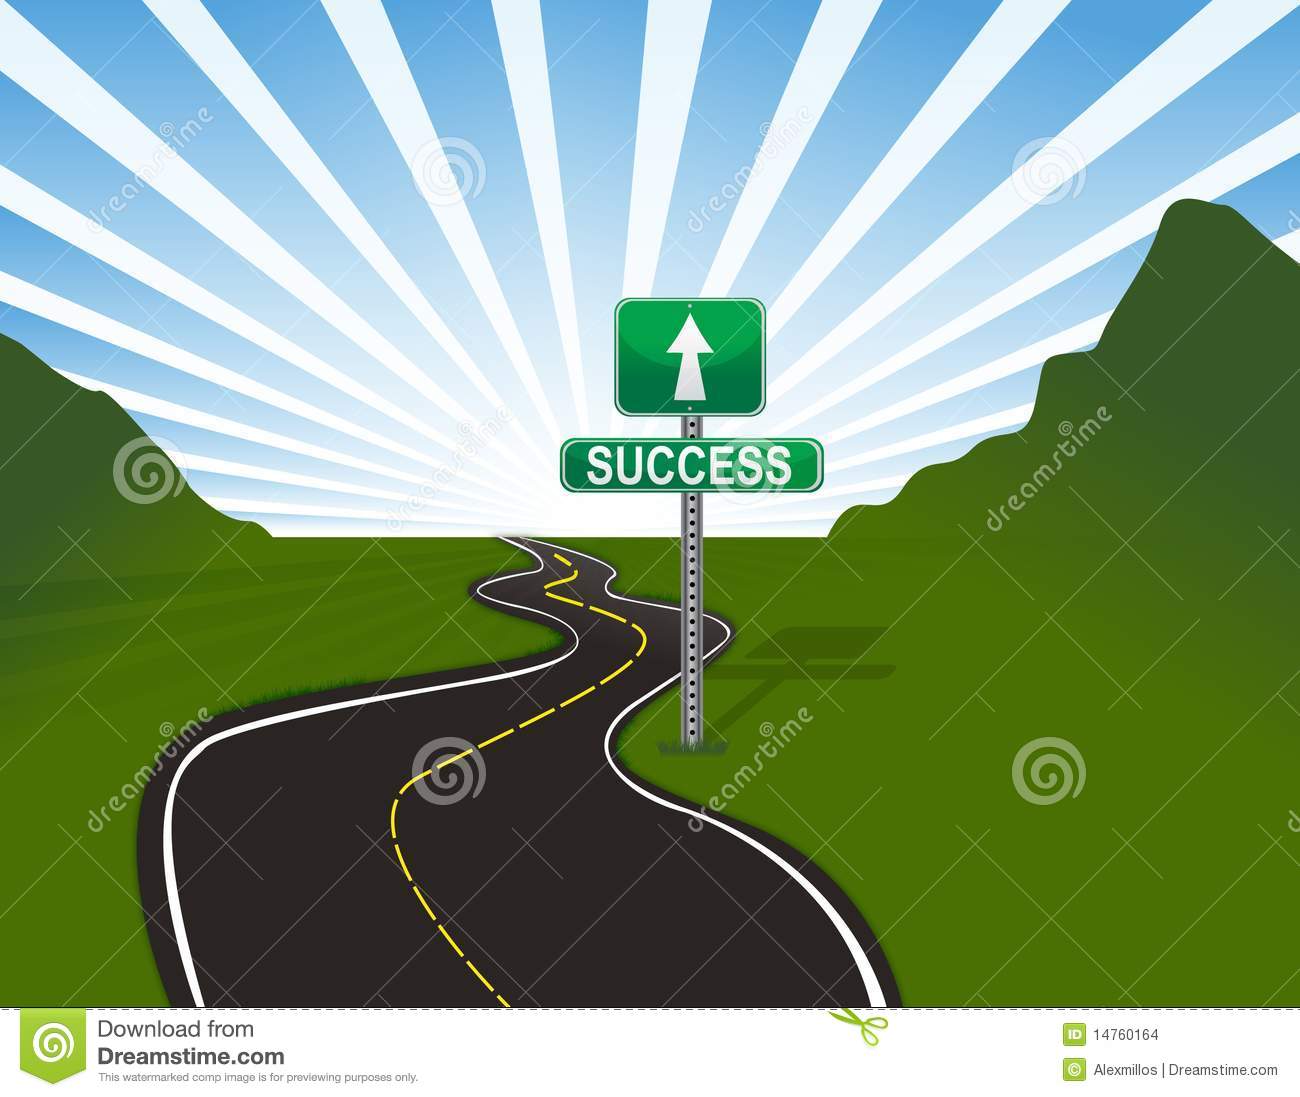 Illustration Of Road To Success  Vector File Available